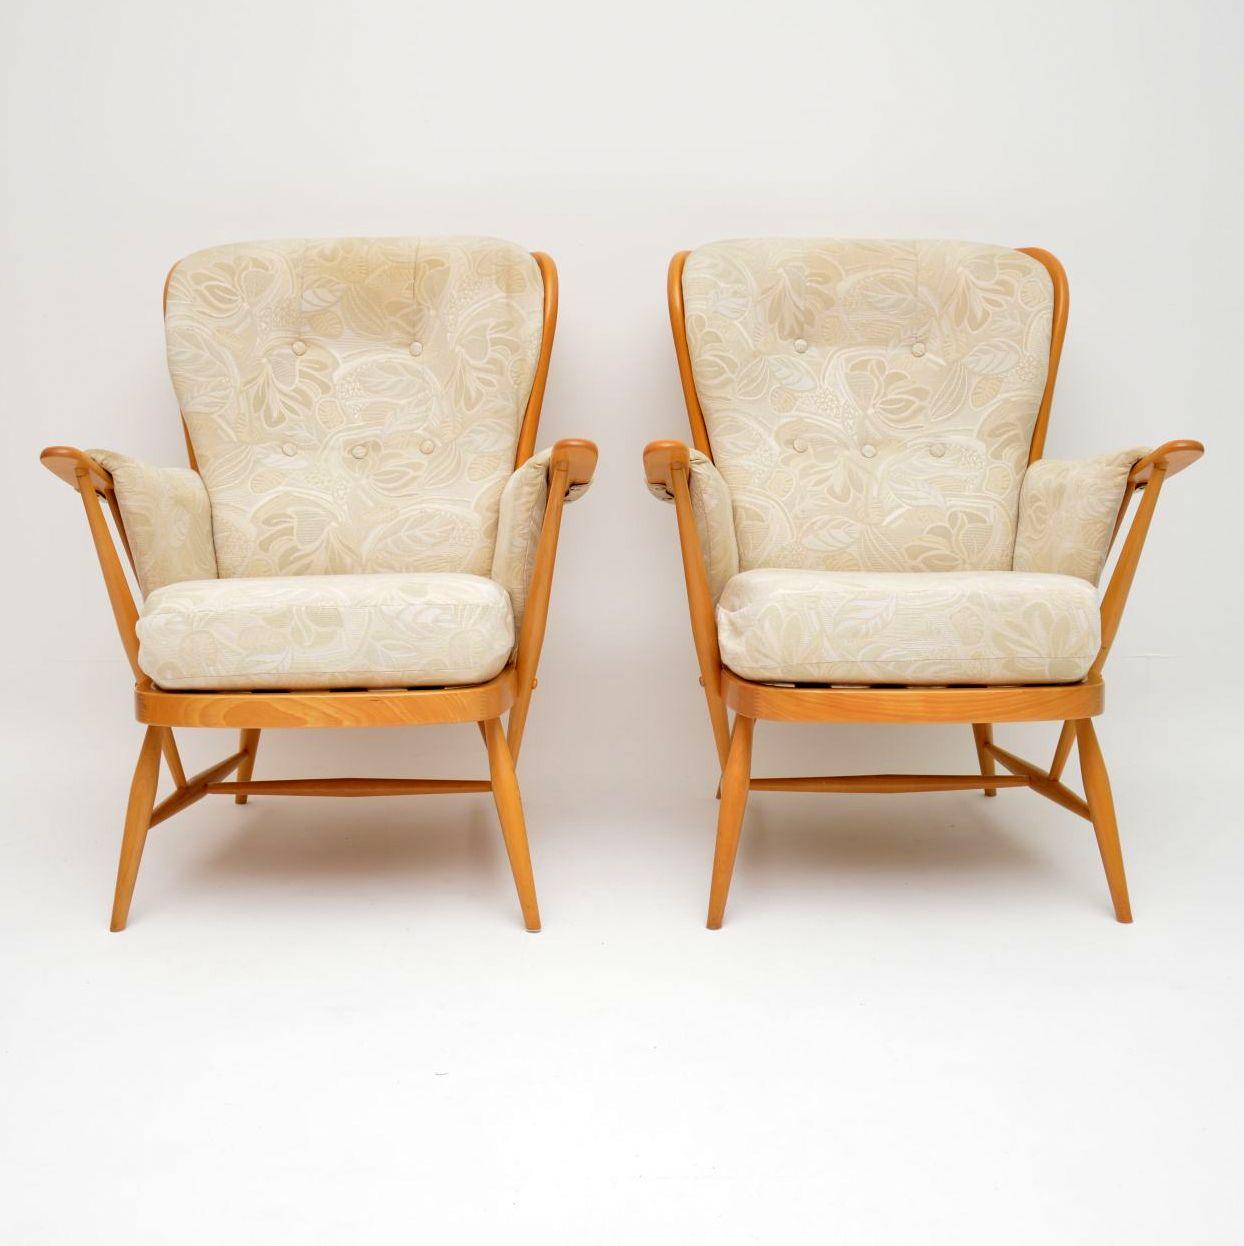 A top quality and extremely comfortable pair of armchairs in solid Elm, these were made by Ercol and they date from around the 1970-80’s. They are so well made and in excellent condition for their age, the frames are all very clean, sturdy and